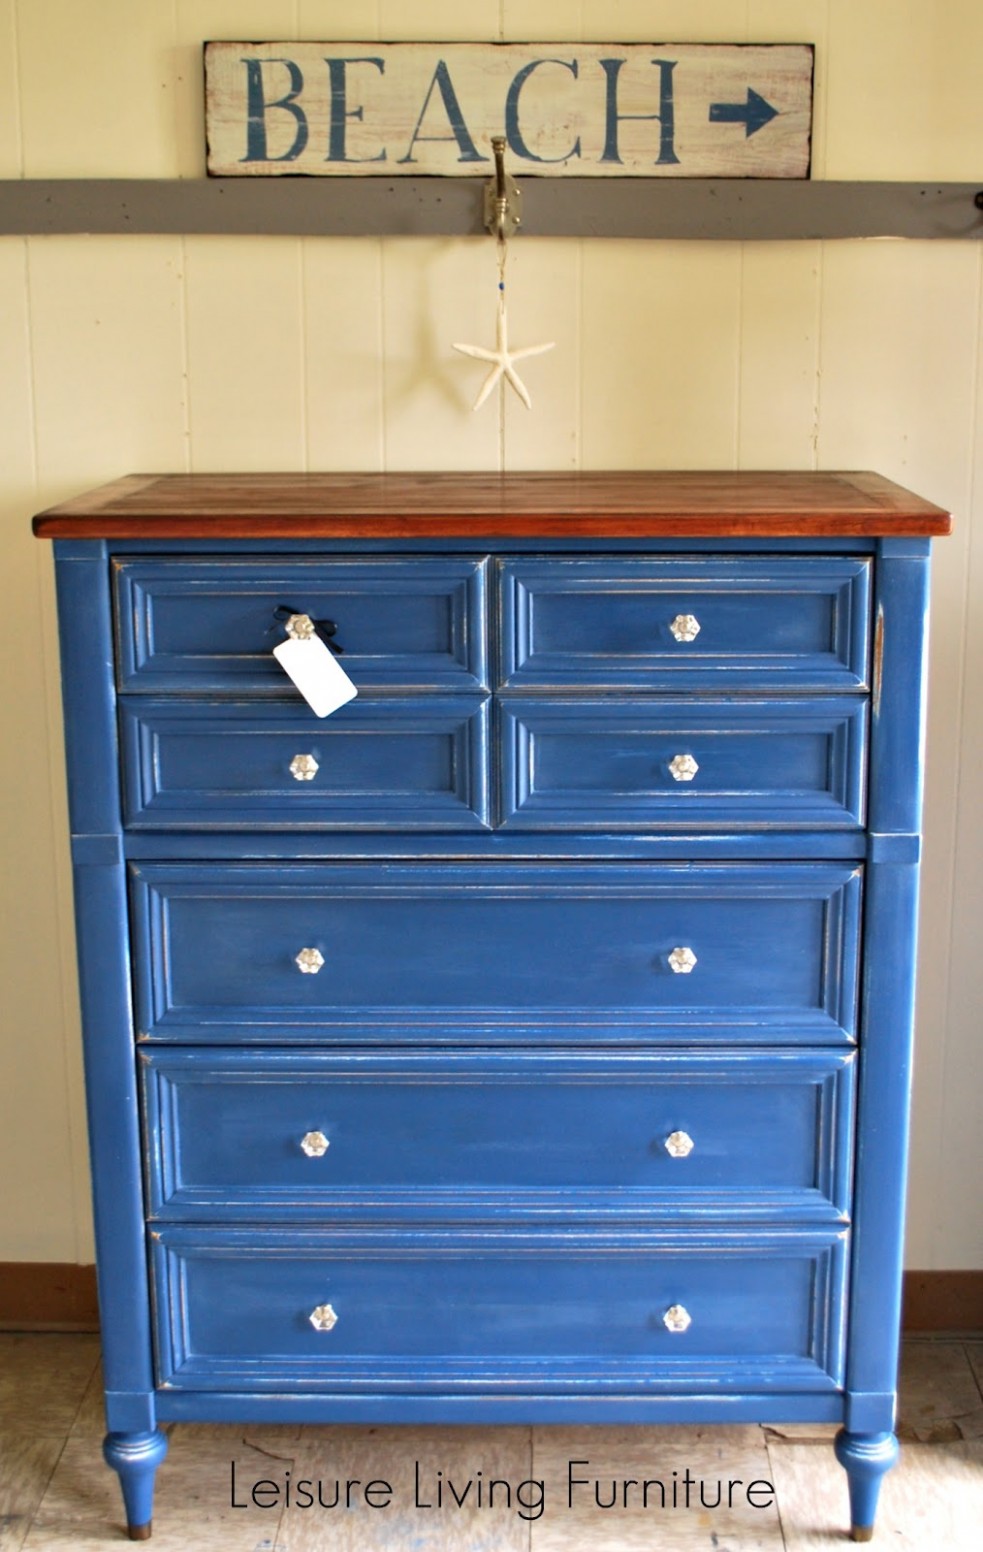 Annie Sloan Chalk Paint | Refreshed Finds Junkies Who Sells Annie Sloan Chalk Paint